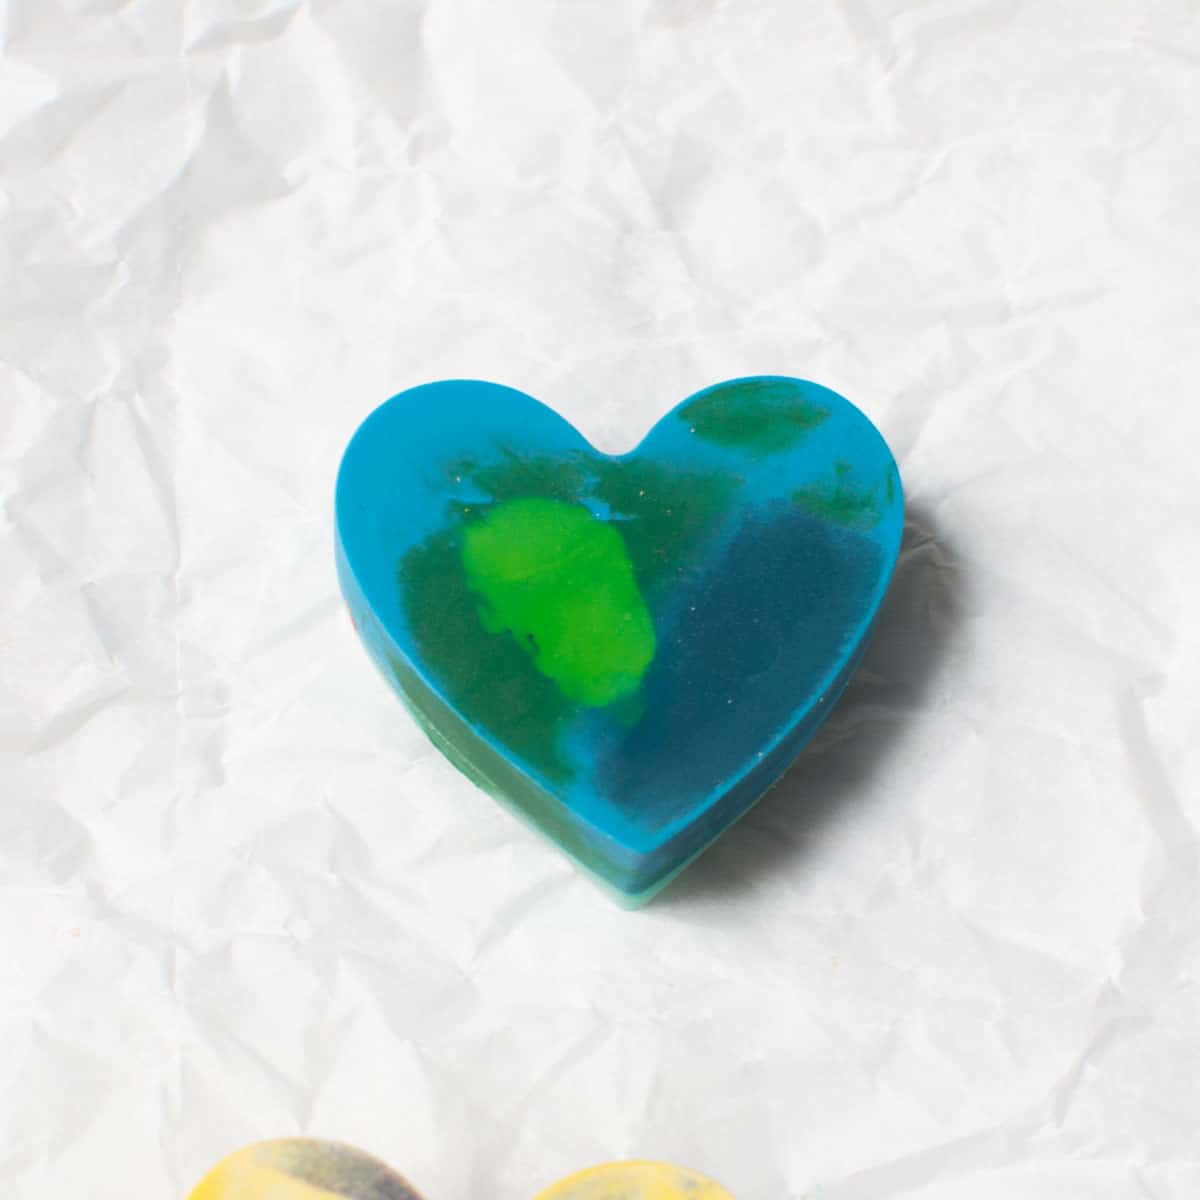 green and blue heart shaped crayon